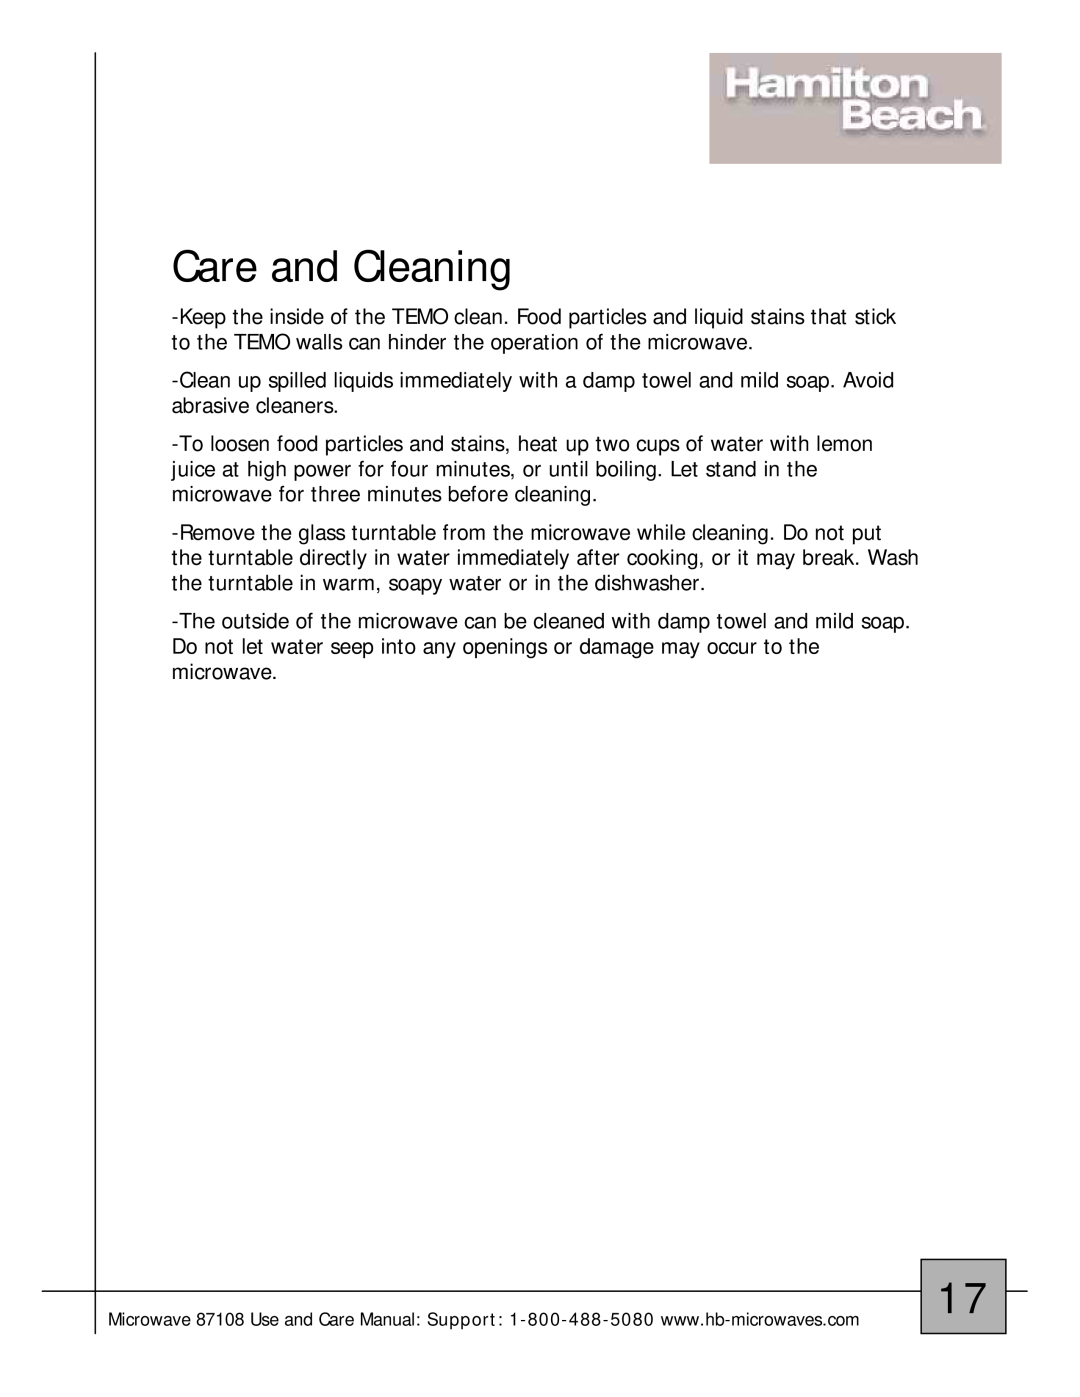 Hamilton Beach 87108 owner manual Care and Cleaning 